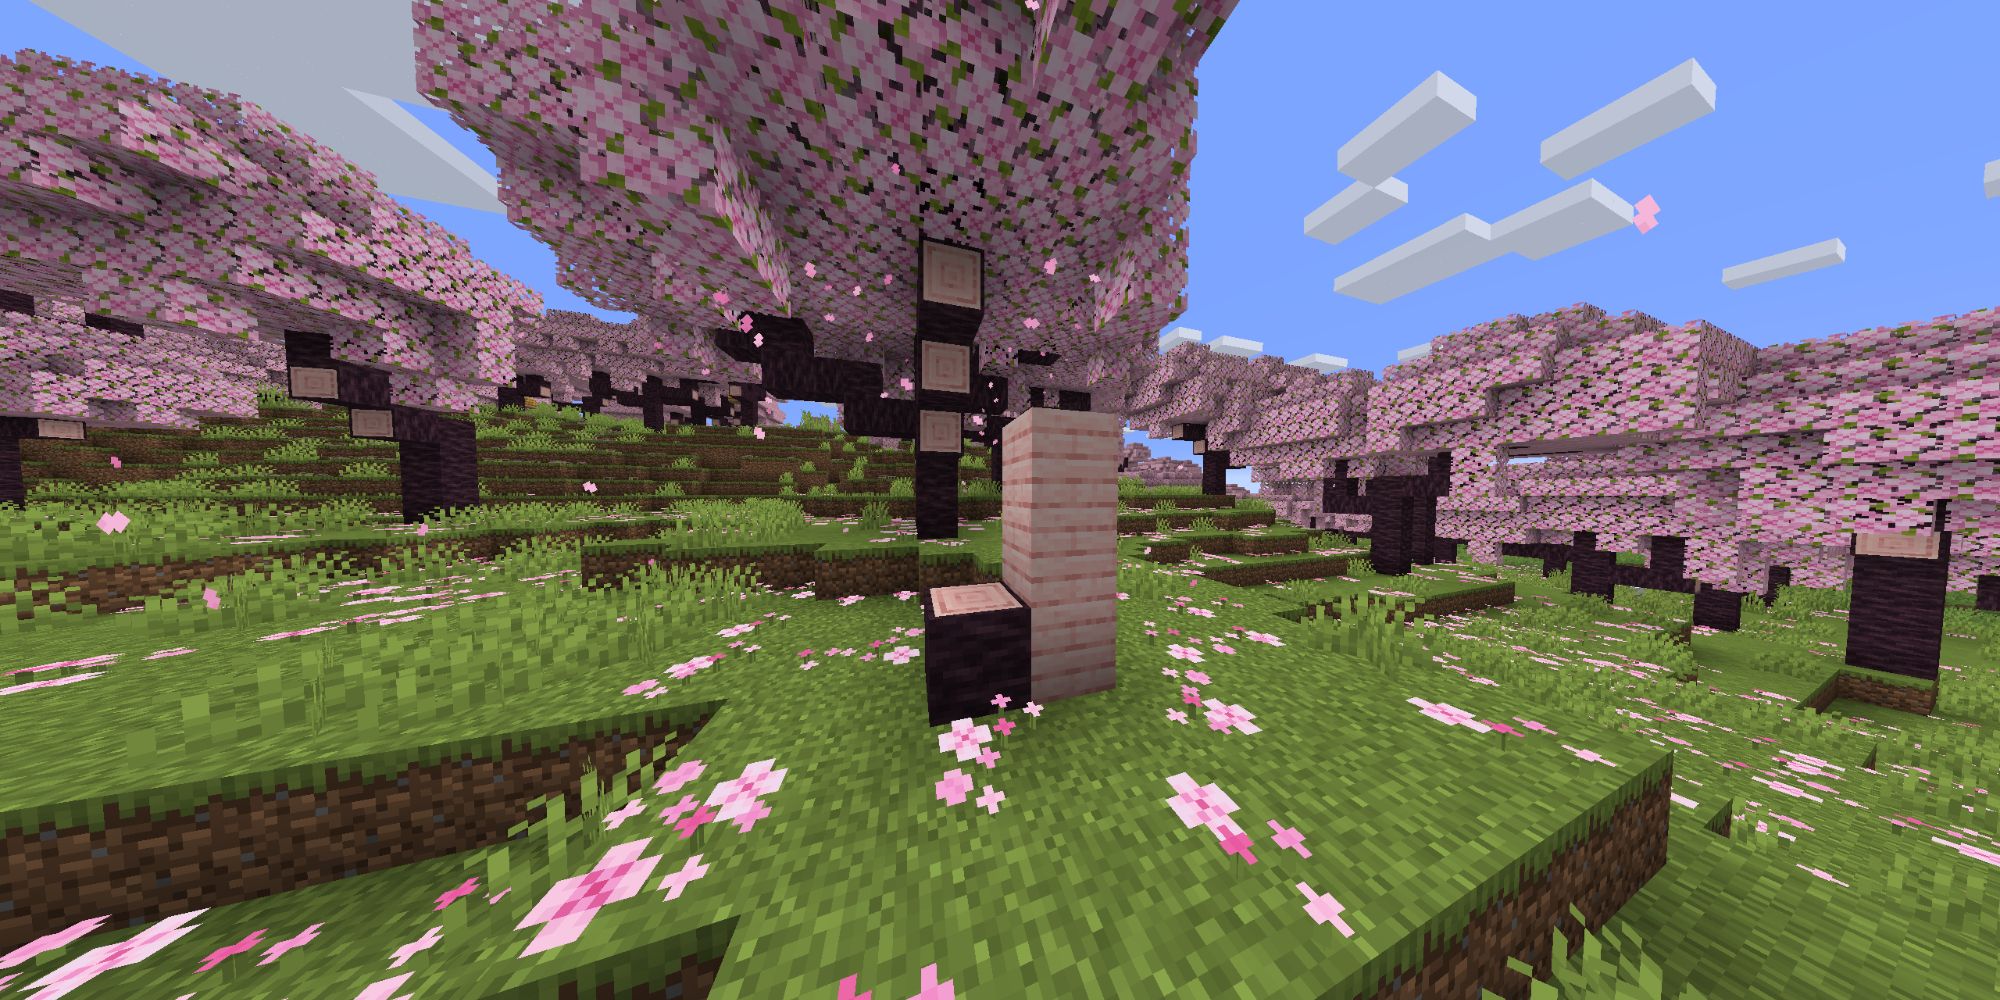 An image from Minecraft of the Cherry Blossom Wood. There are three Cherry Blossom planks alongside a singular log sitting in a Cherry Blossom biome